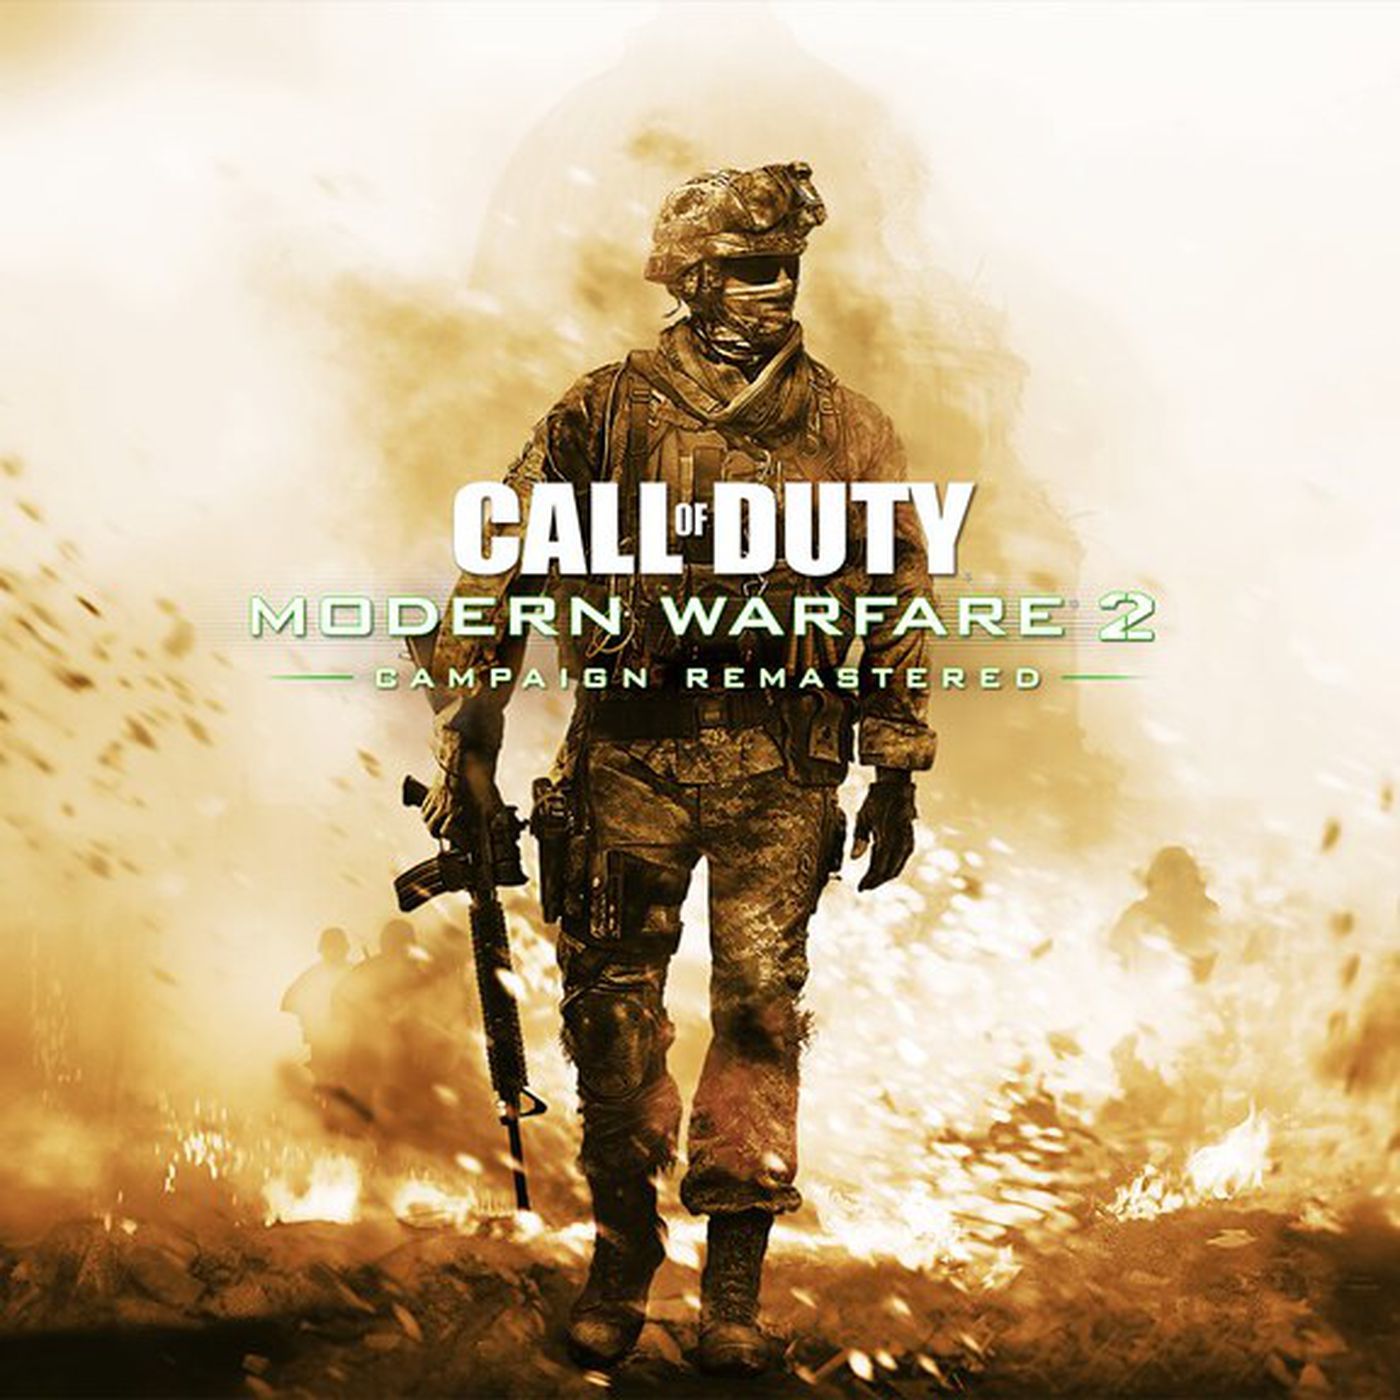 Call of Duty: Modern Warfare 2 has been remastered and is out today